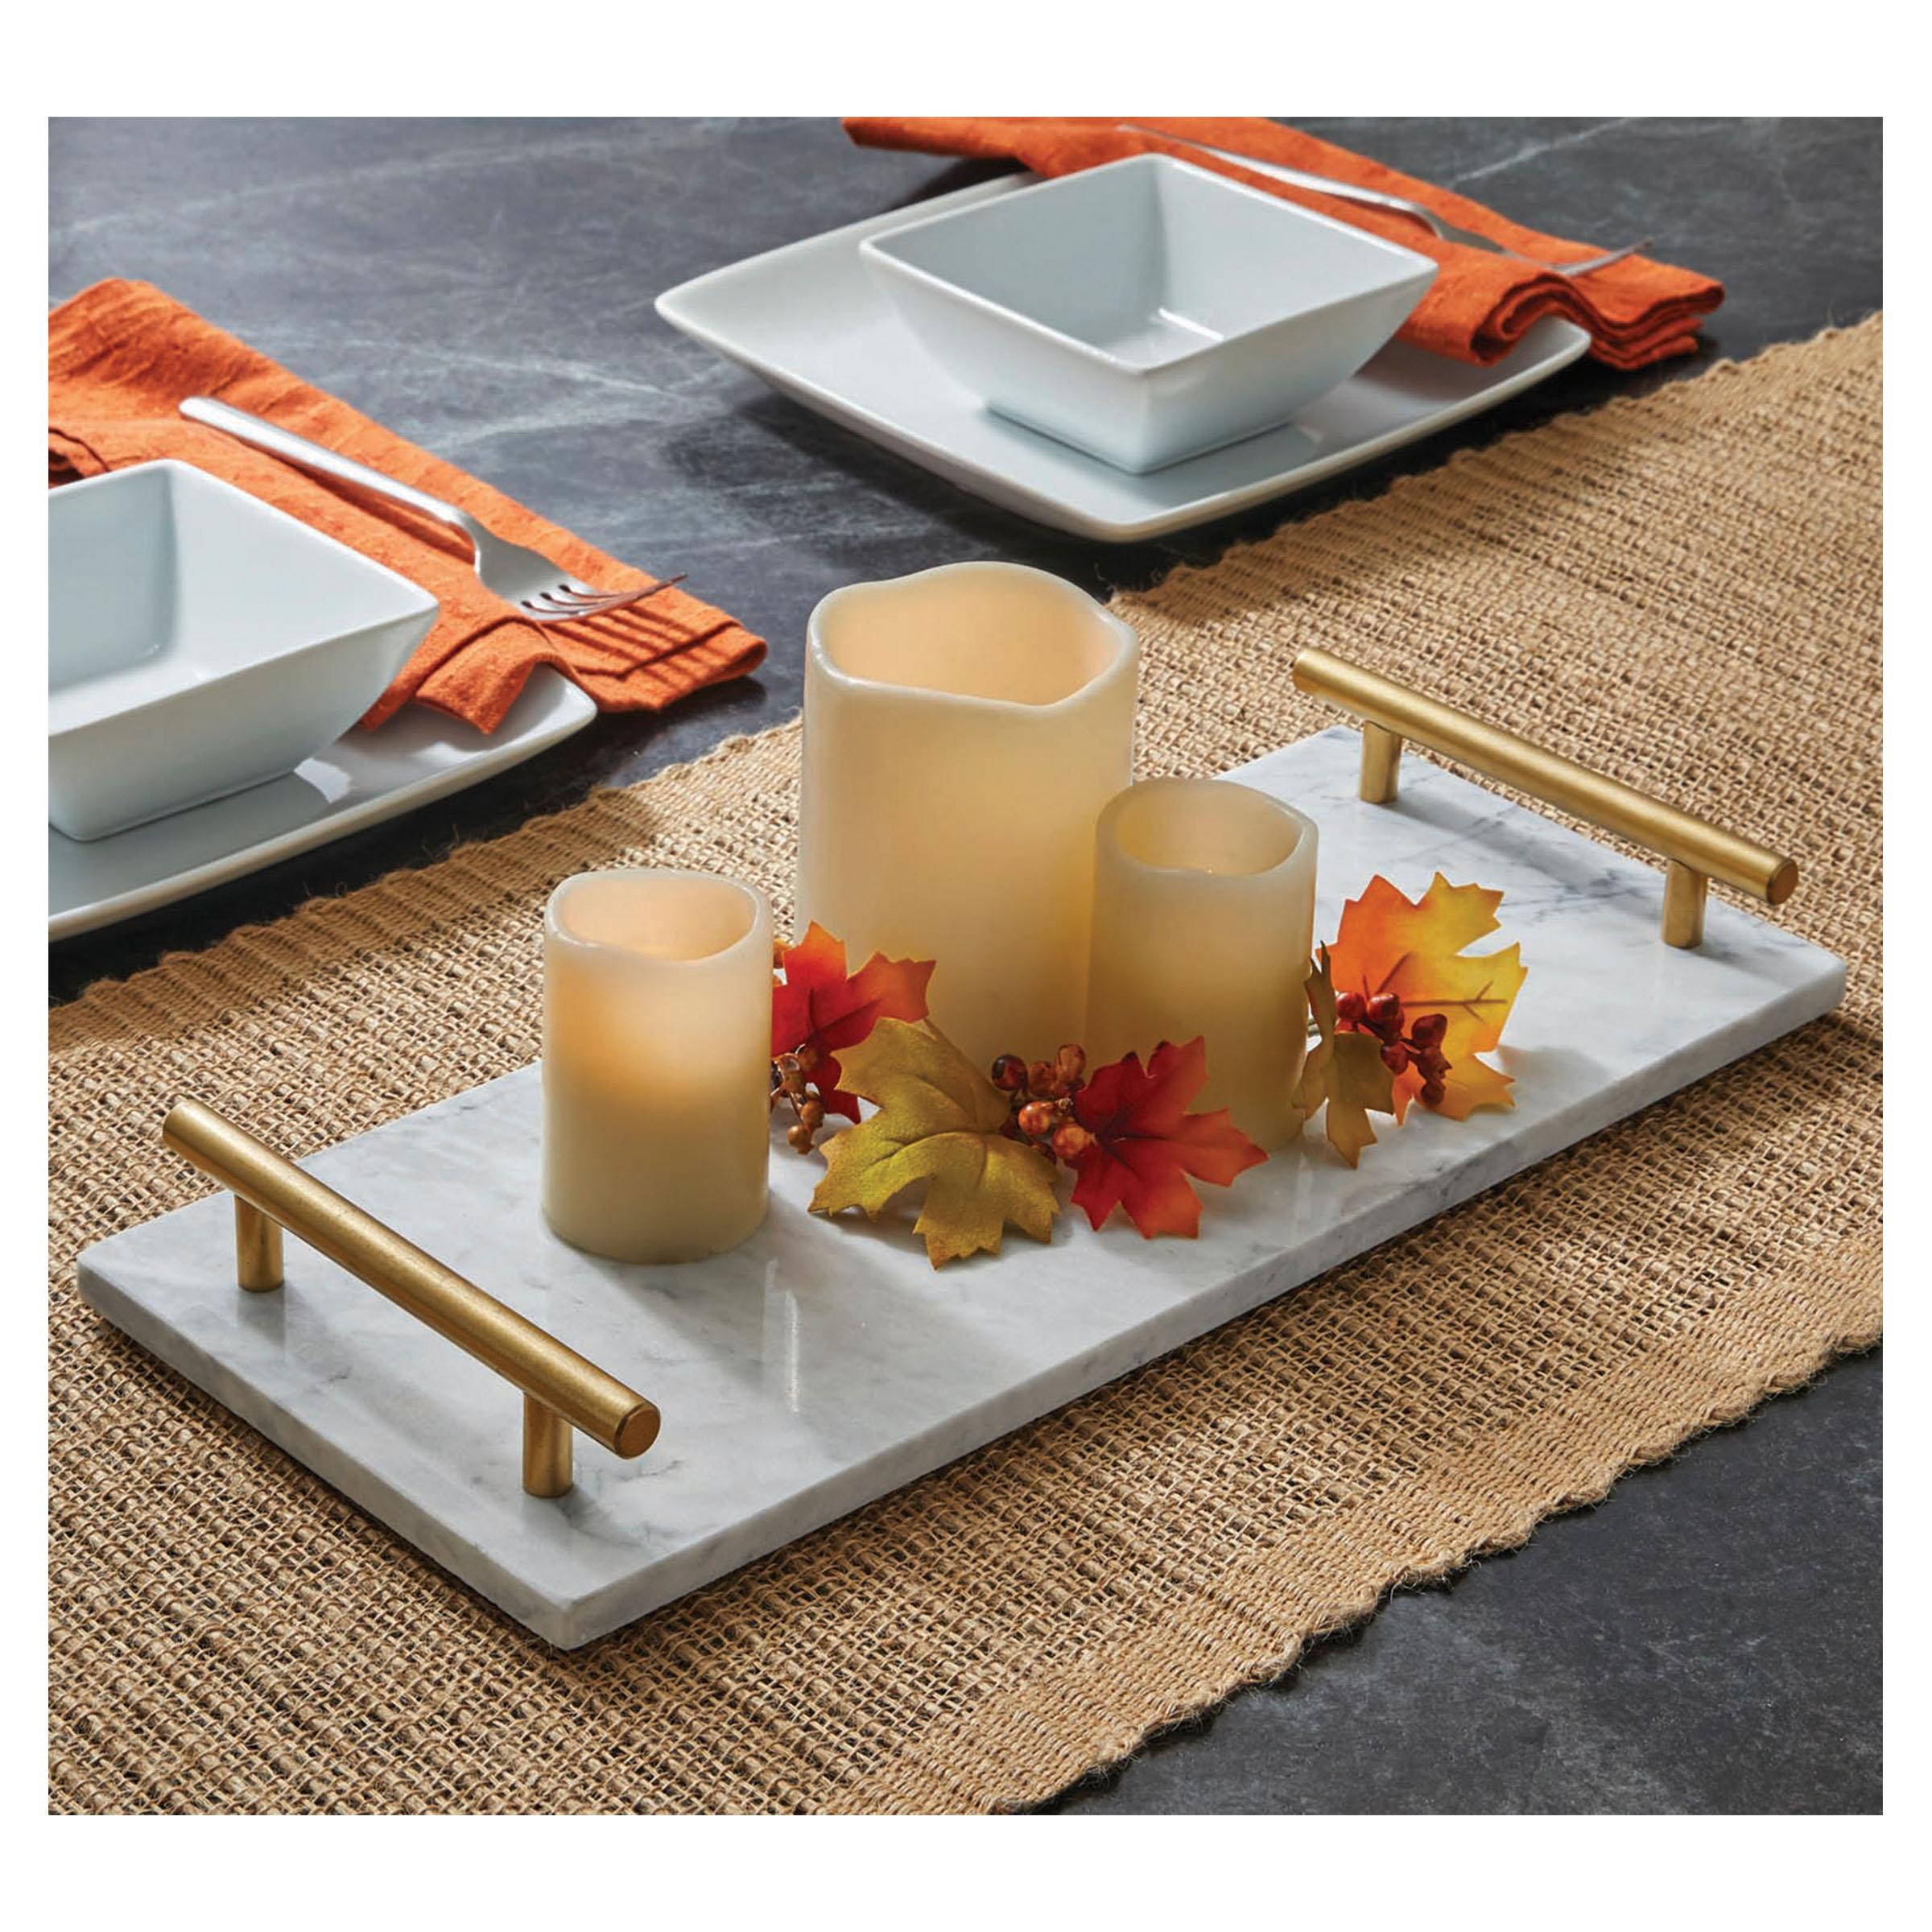 Better Homes&gardens Bhg Marble Tray - image 1 of 3